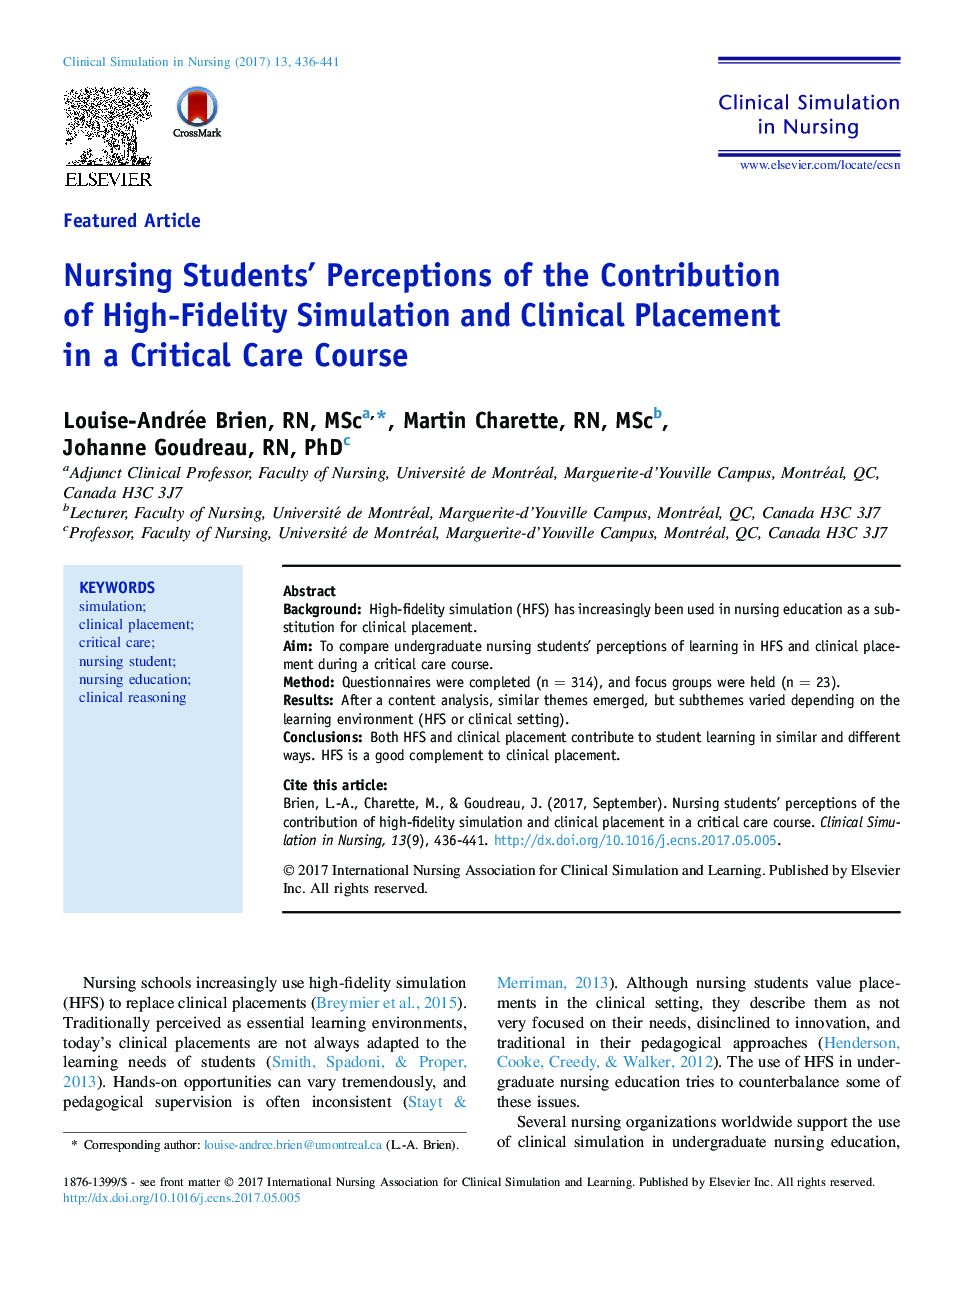 Nursing Students' Perceptions of the Contribution of High-Fidelity Simulation and Clinical Placement in a Critical Care Course